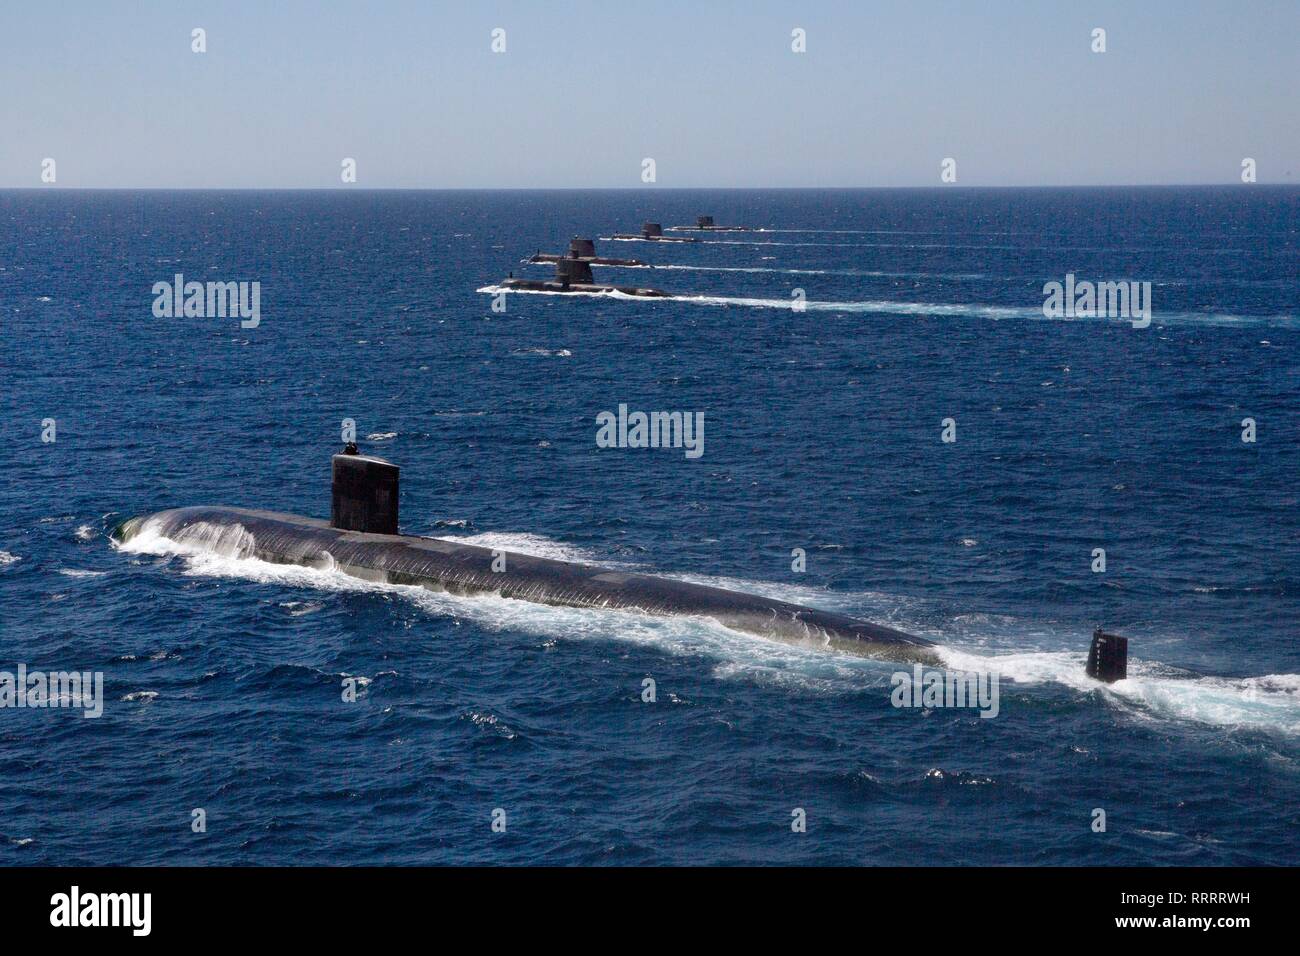 The U.S. Navy Los Angeles-class attack submarine USS Santa Fe sails in formation with Royal Australian Navy Collins class submarines HMAS Collins, HMAS Farncomb, HMAS Dechaineux and HMAS Sheean, as an Australian MH-60R Seahawk helicopter flies overhead in the West Australian exercise area February 18, 2019 off the coast of Fremantle, Australia. Stock Photo